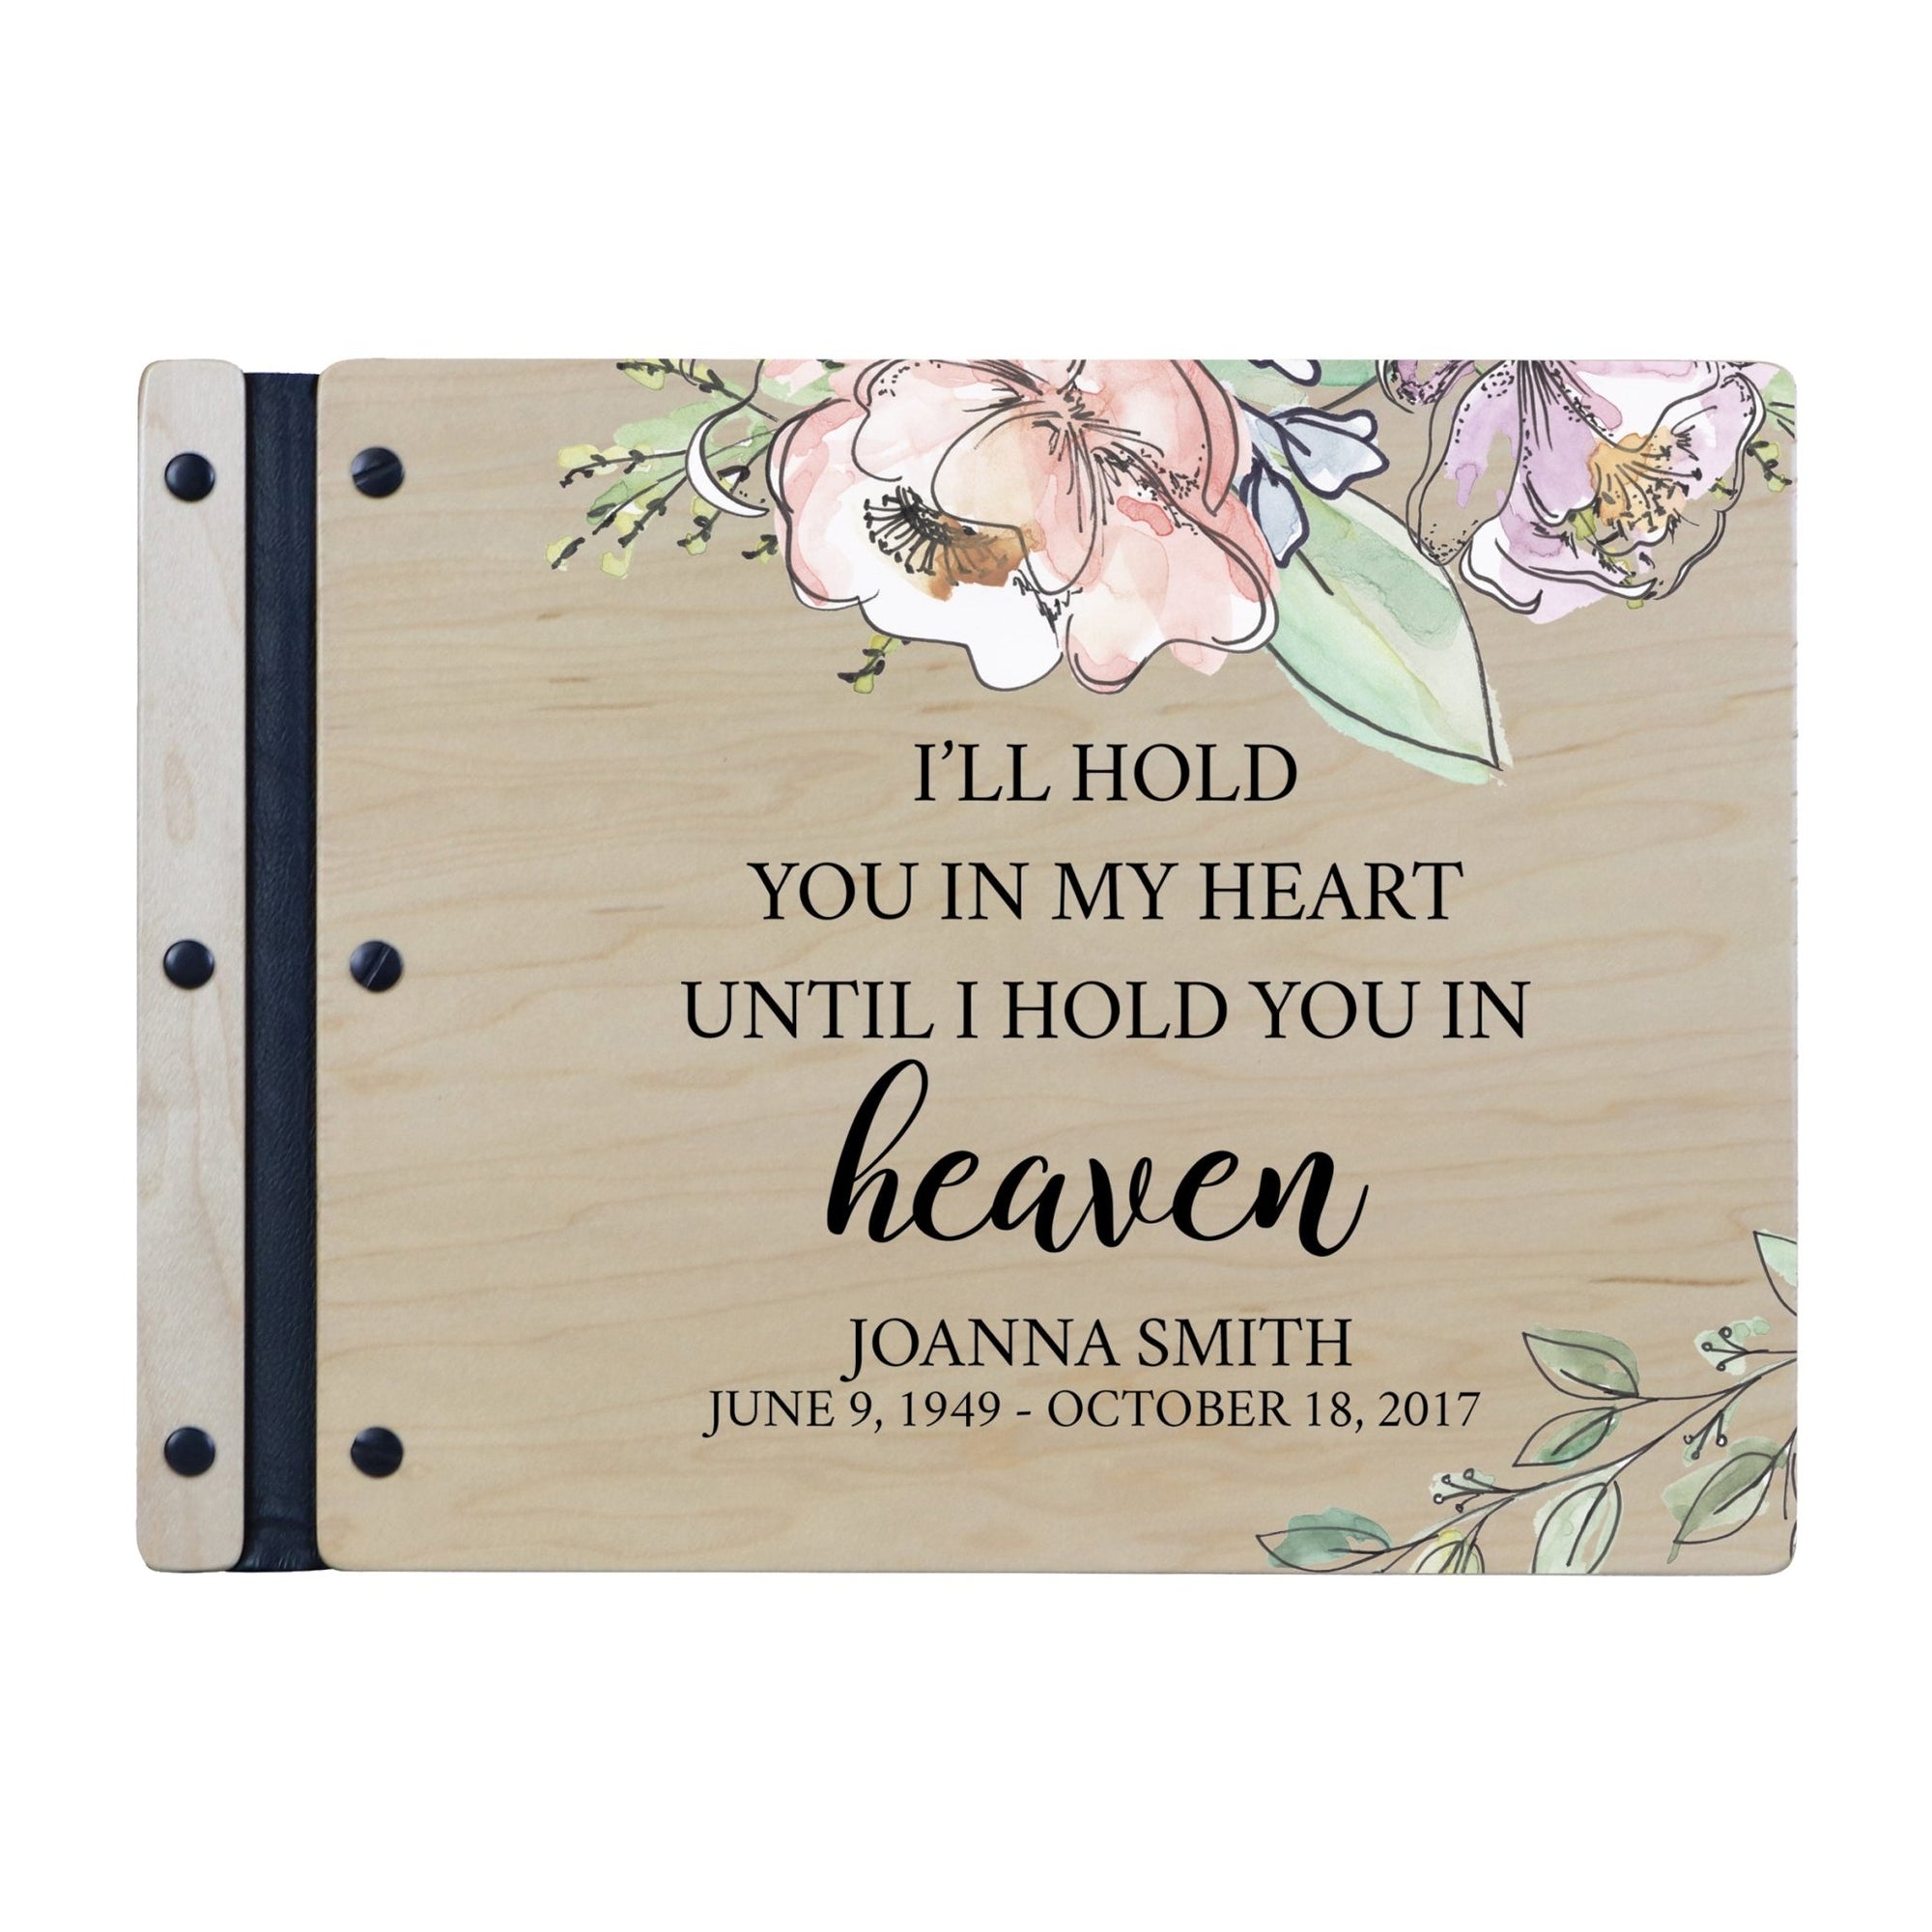 Custom Large Wooden Memorial Guestbook 13.375x10in - I’ll Hold You - LifeSong Milestones